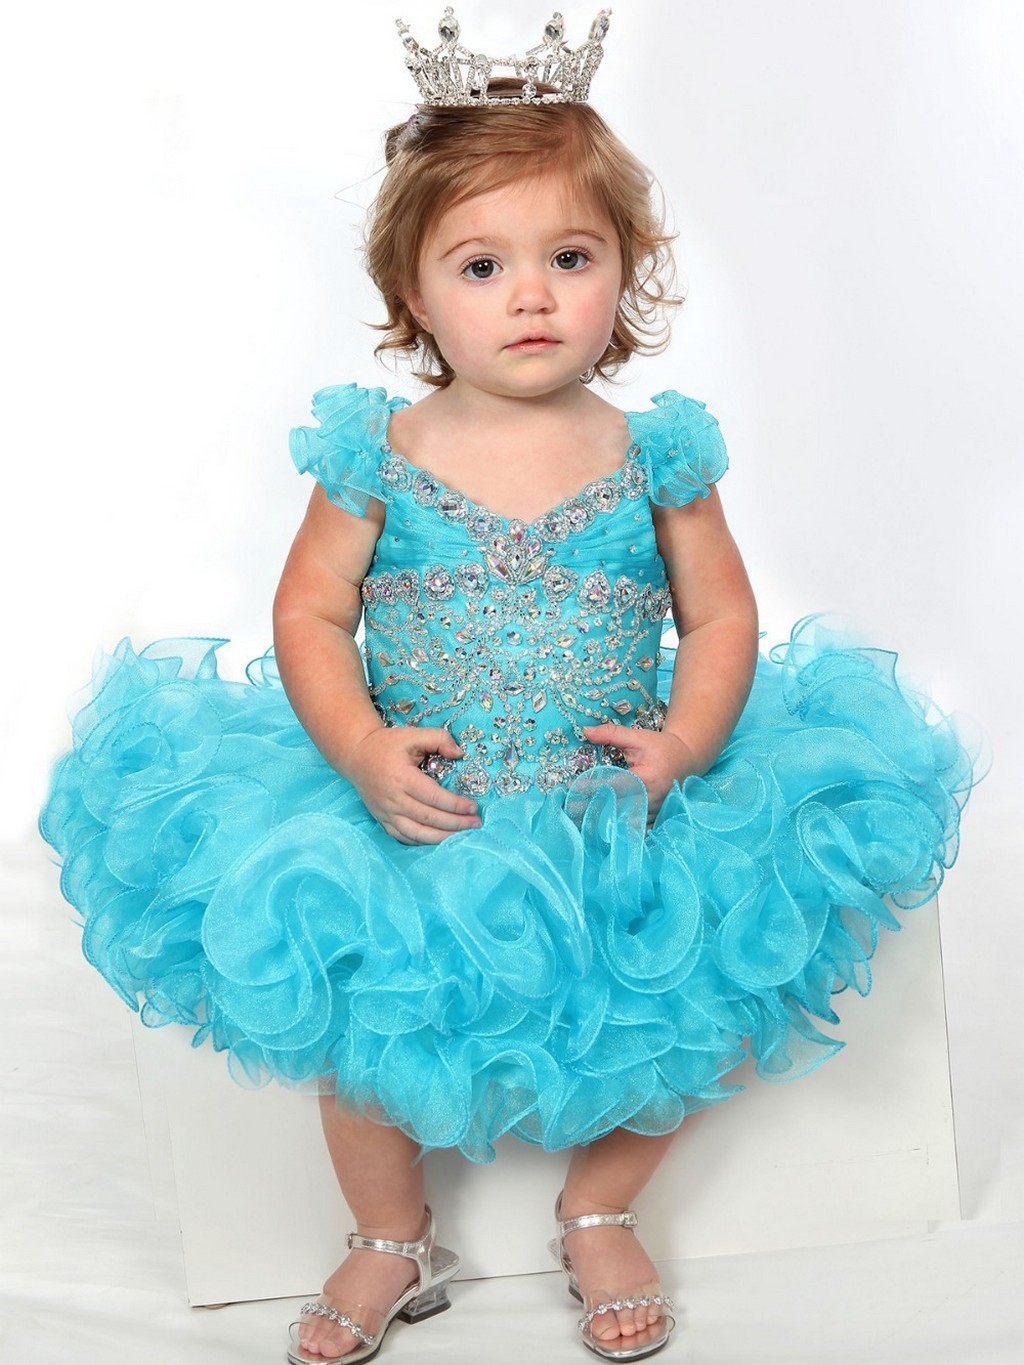 Baby Dress For 1 Year Old : Things To Know Before Choosing